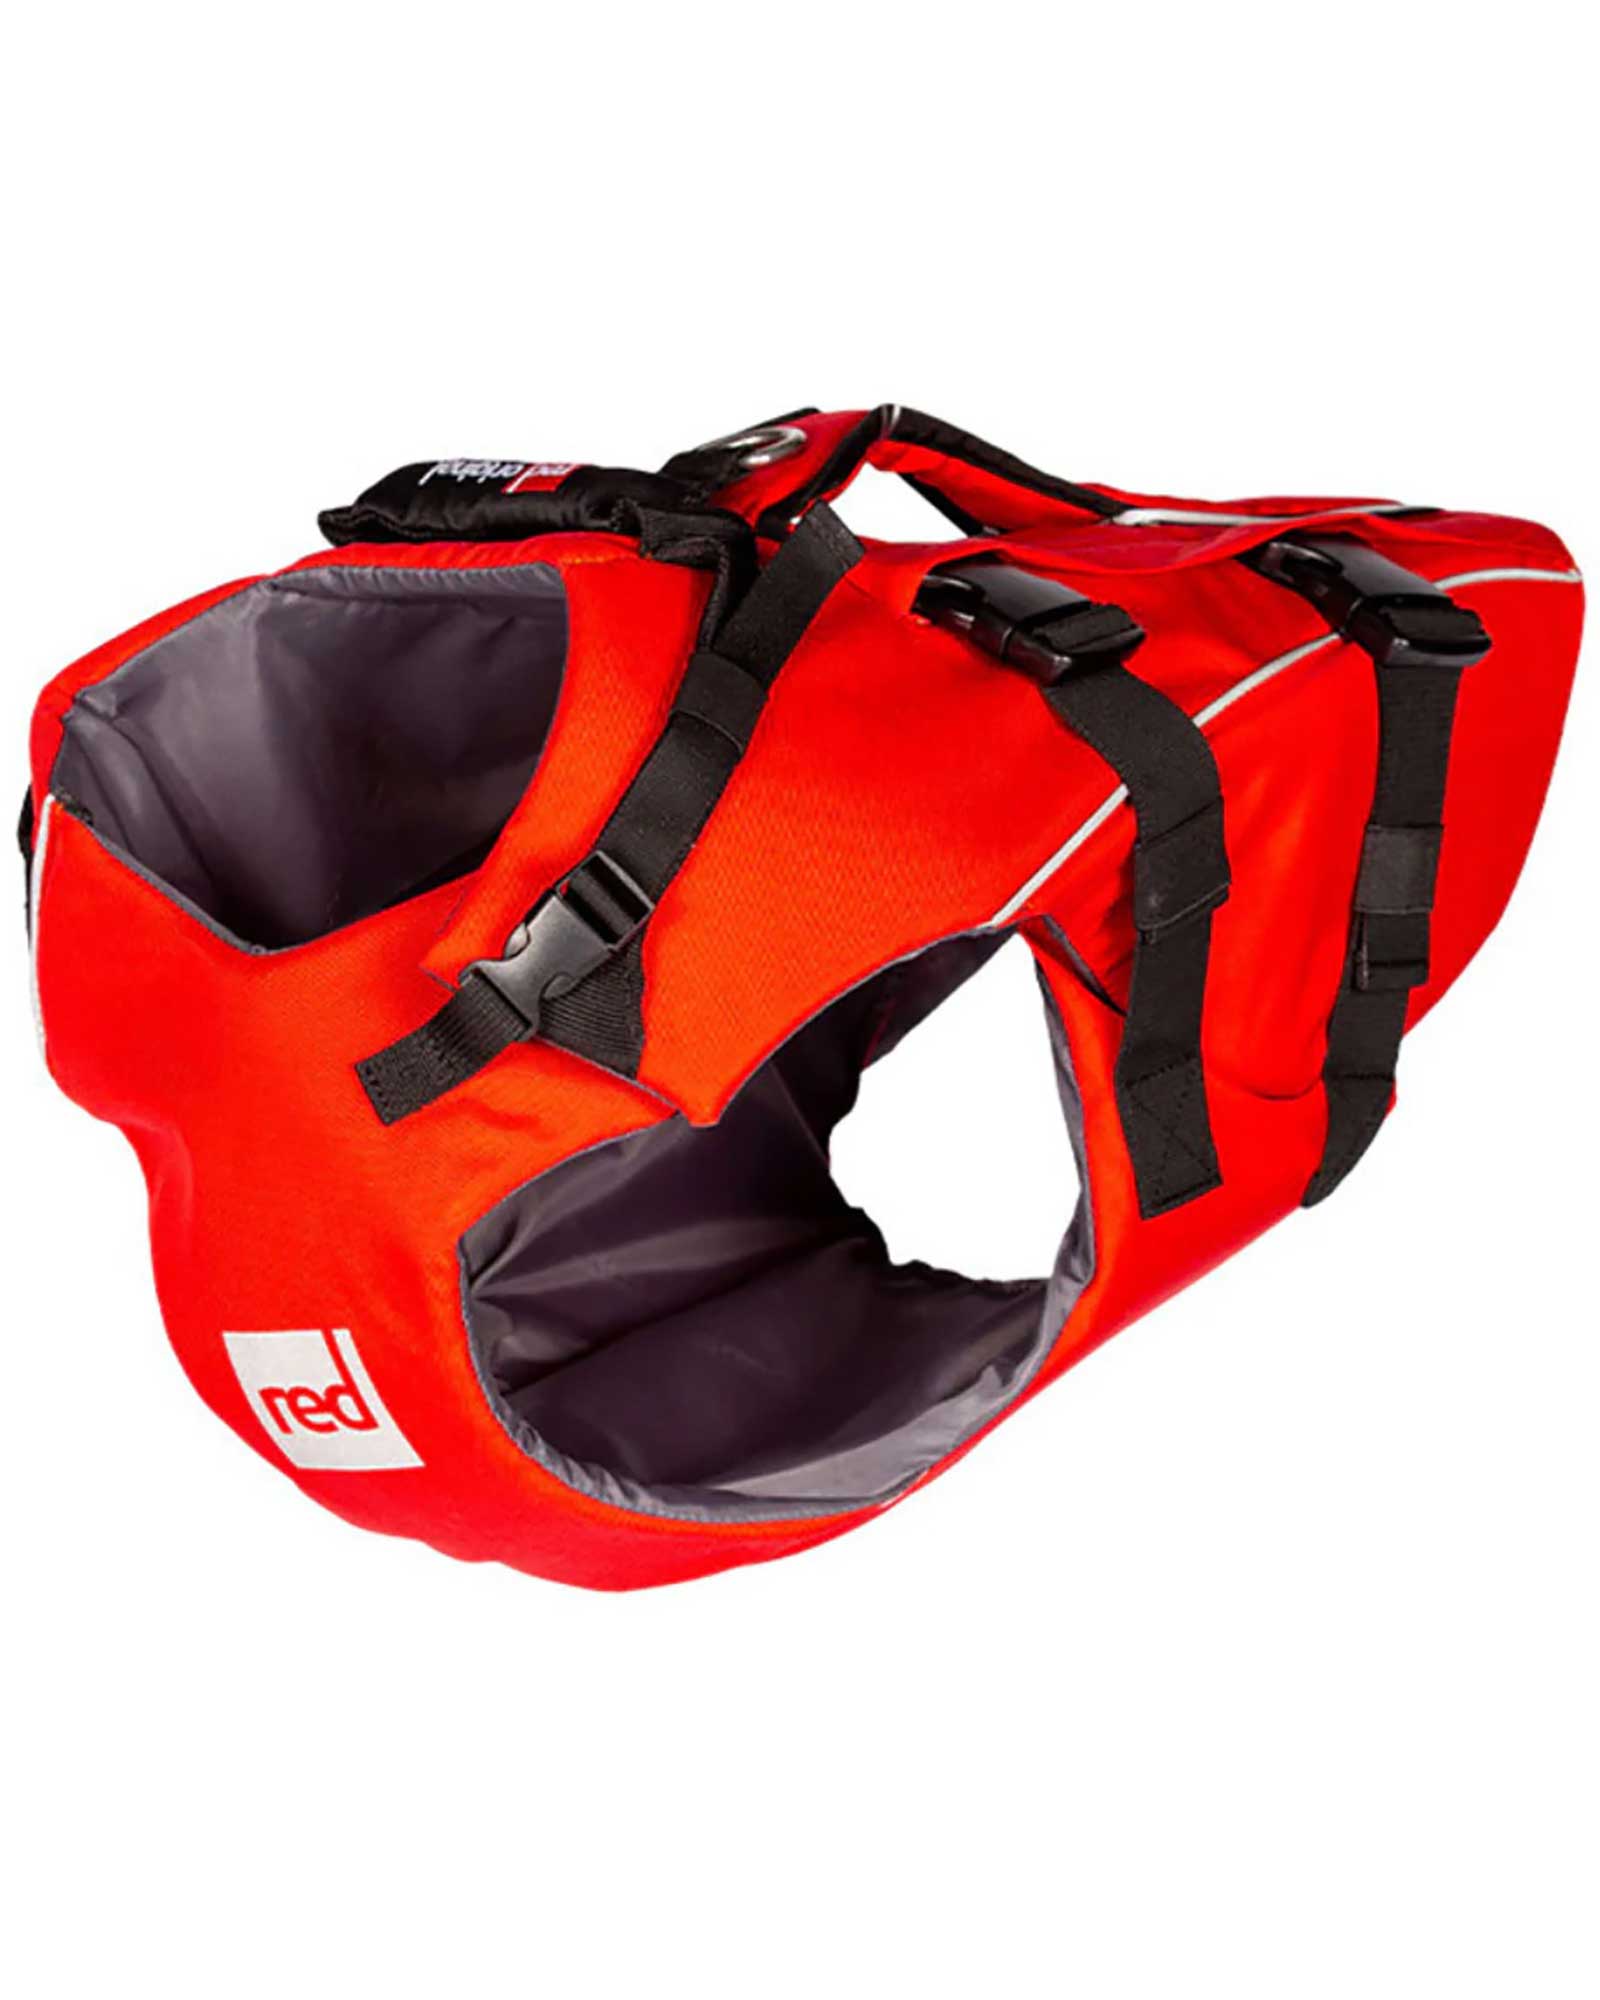 Red Dog PFD   Xlarge - Red